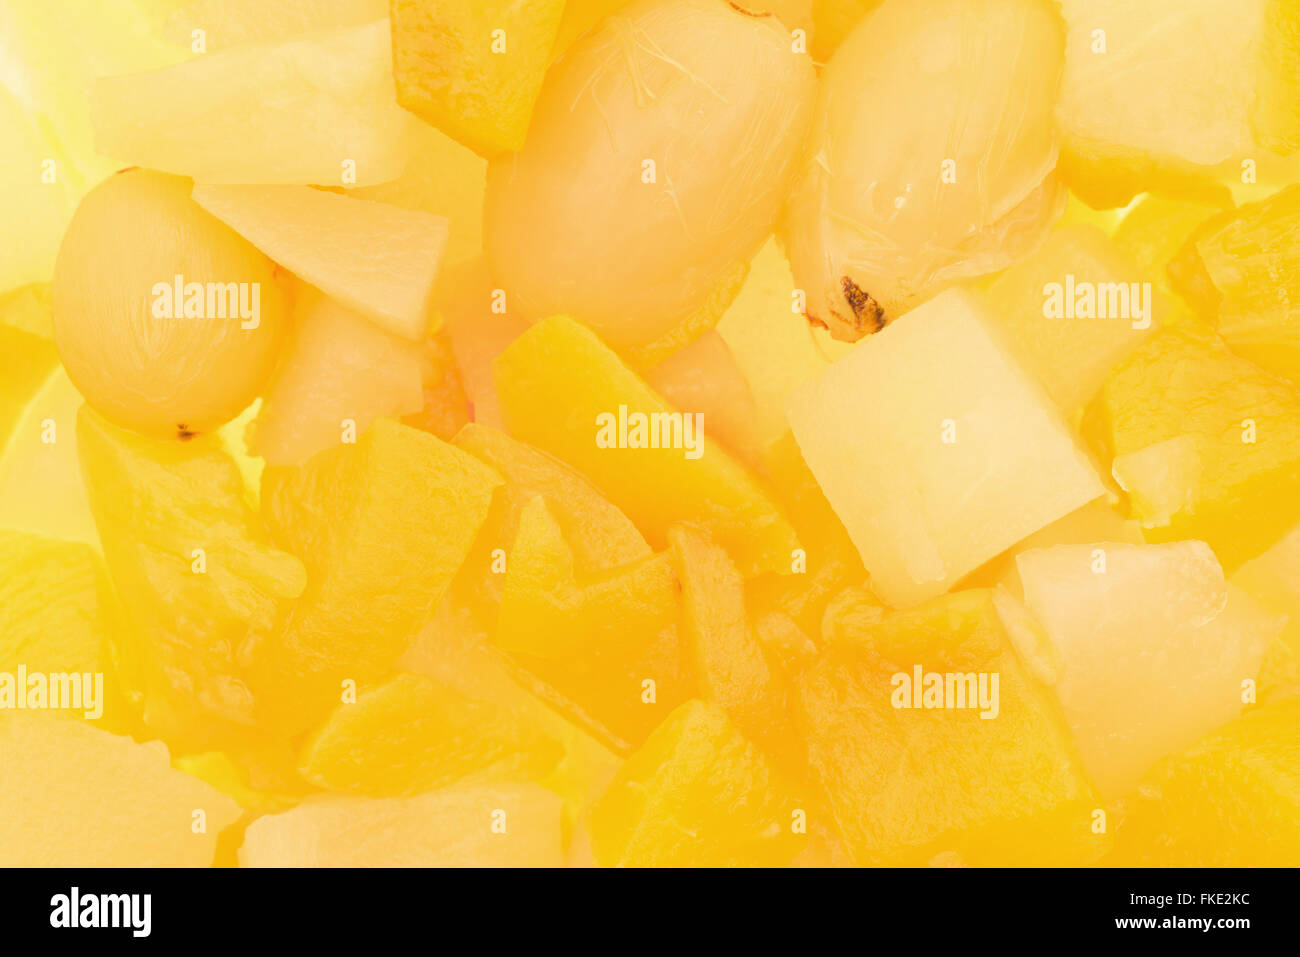 A very close view of canned fruit. Stock Photo